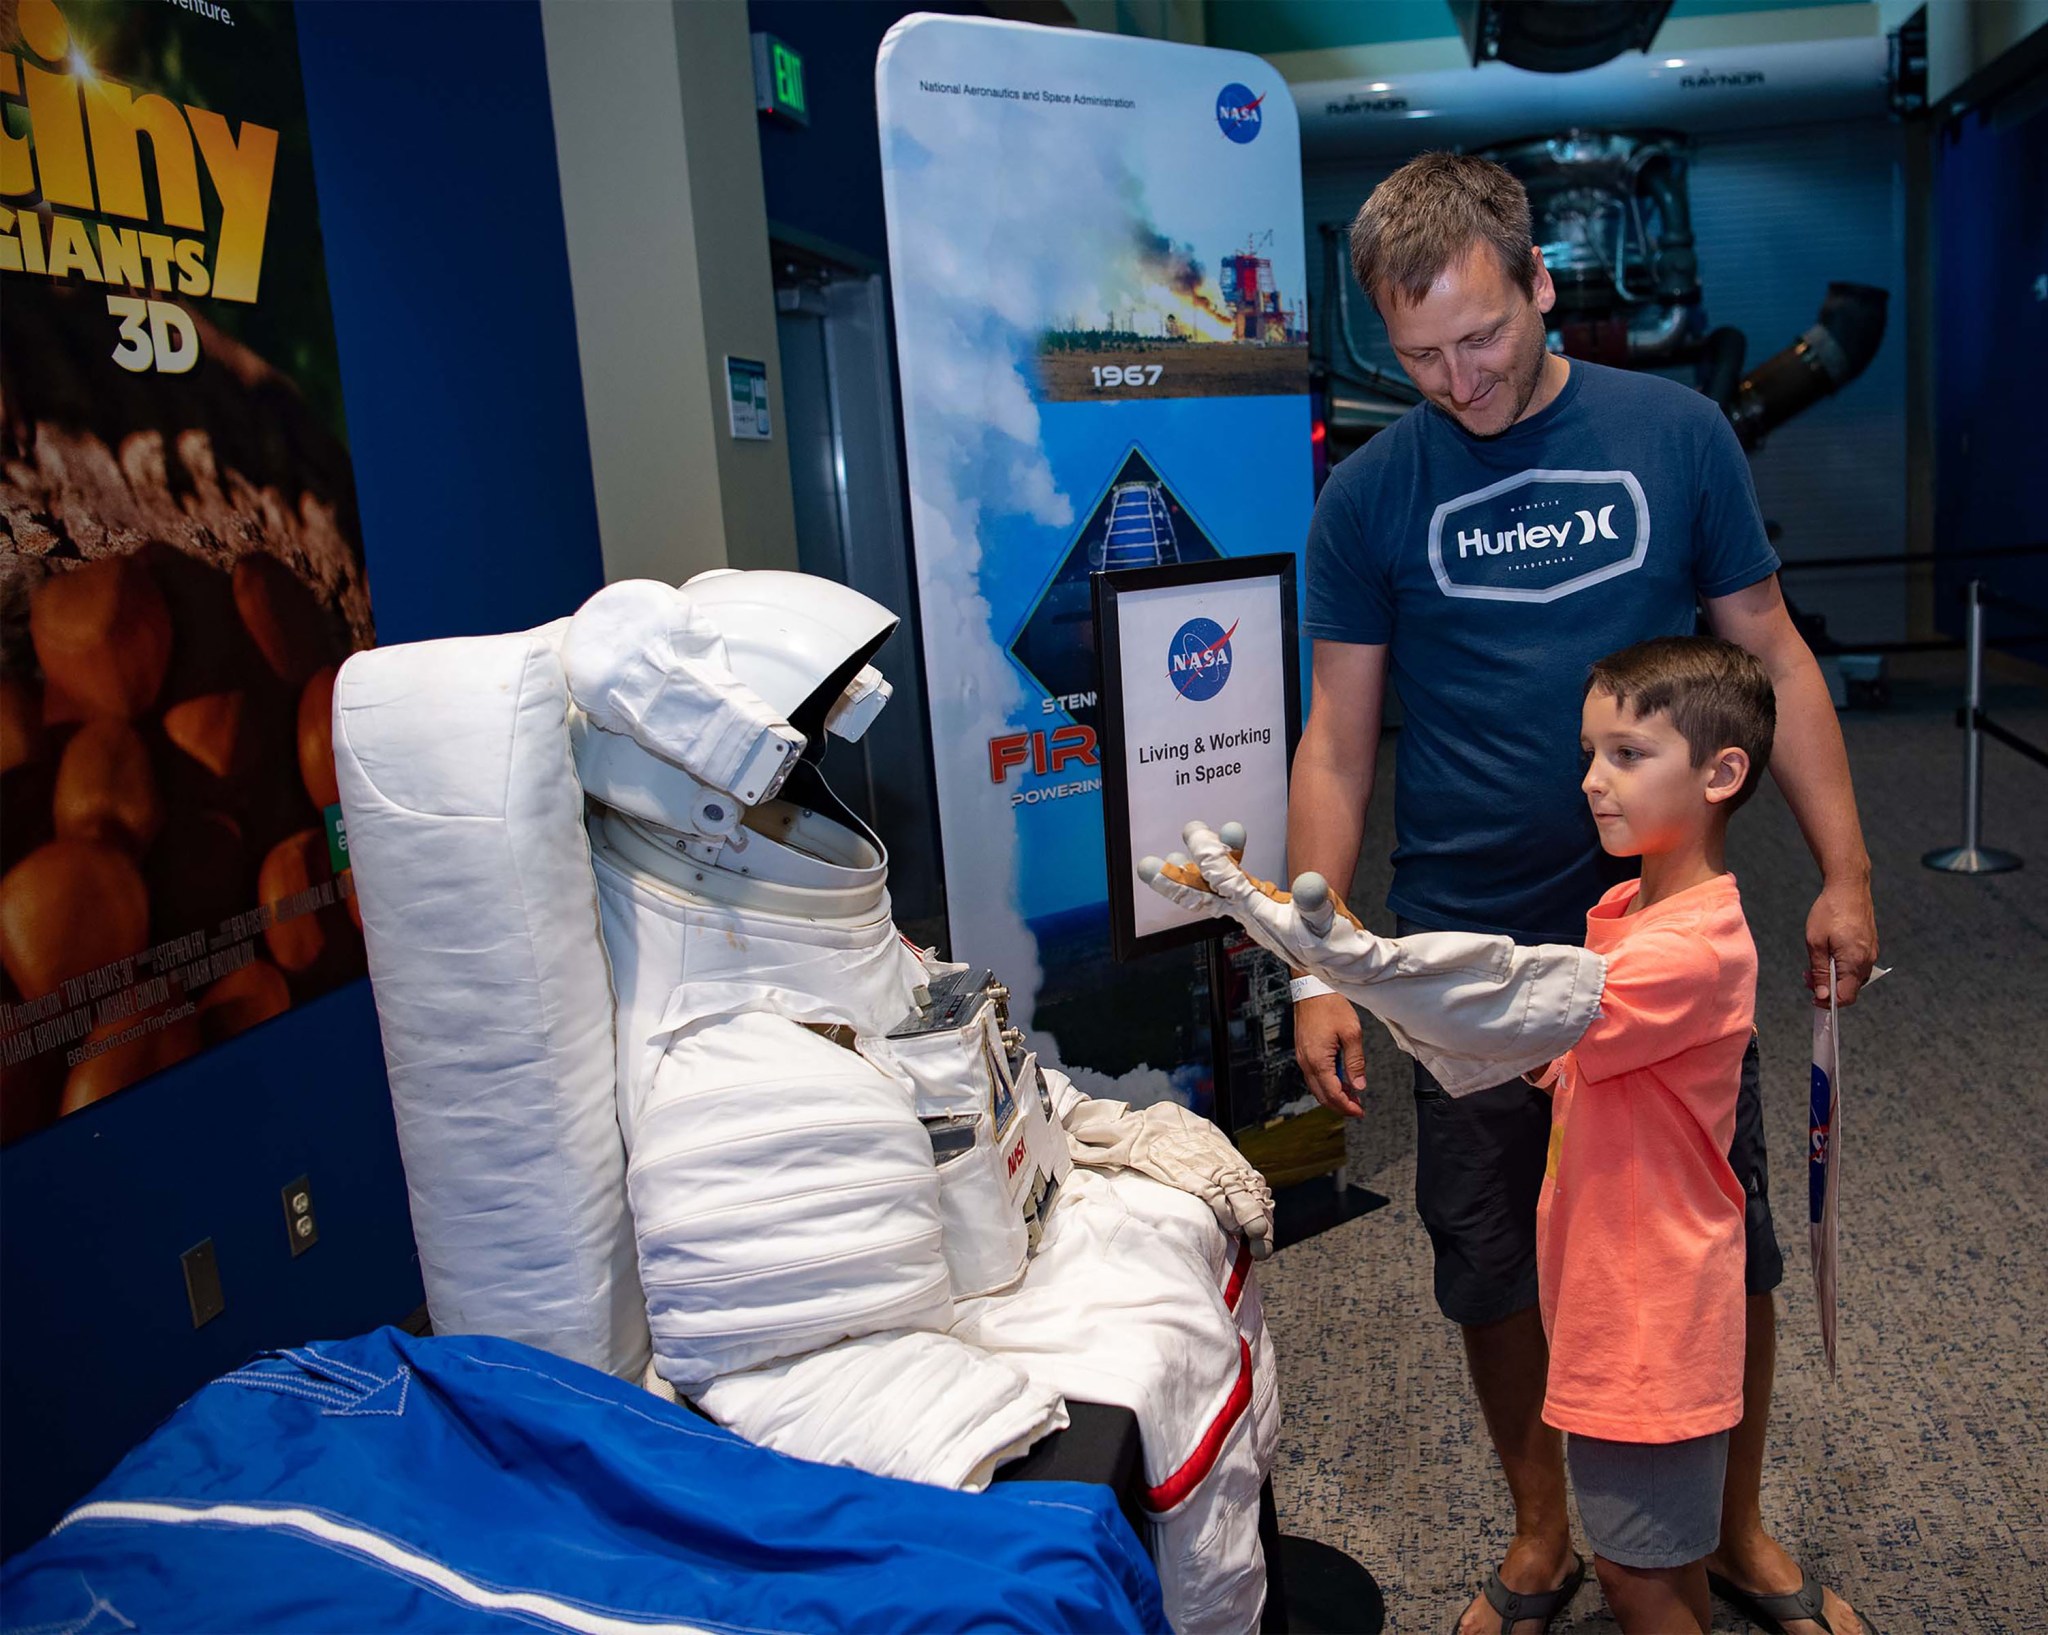 A young visitor tries out the astronaut glove exhibit at INFINITY Science Center